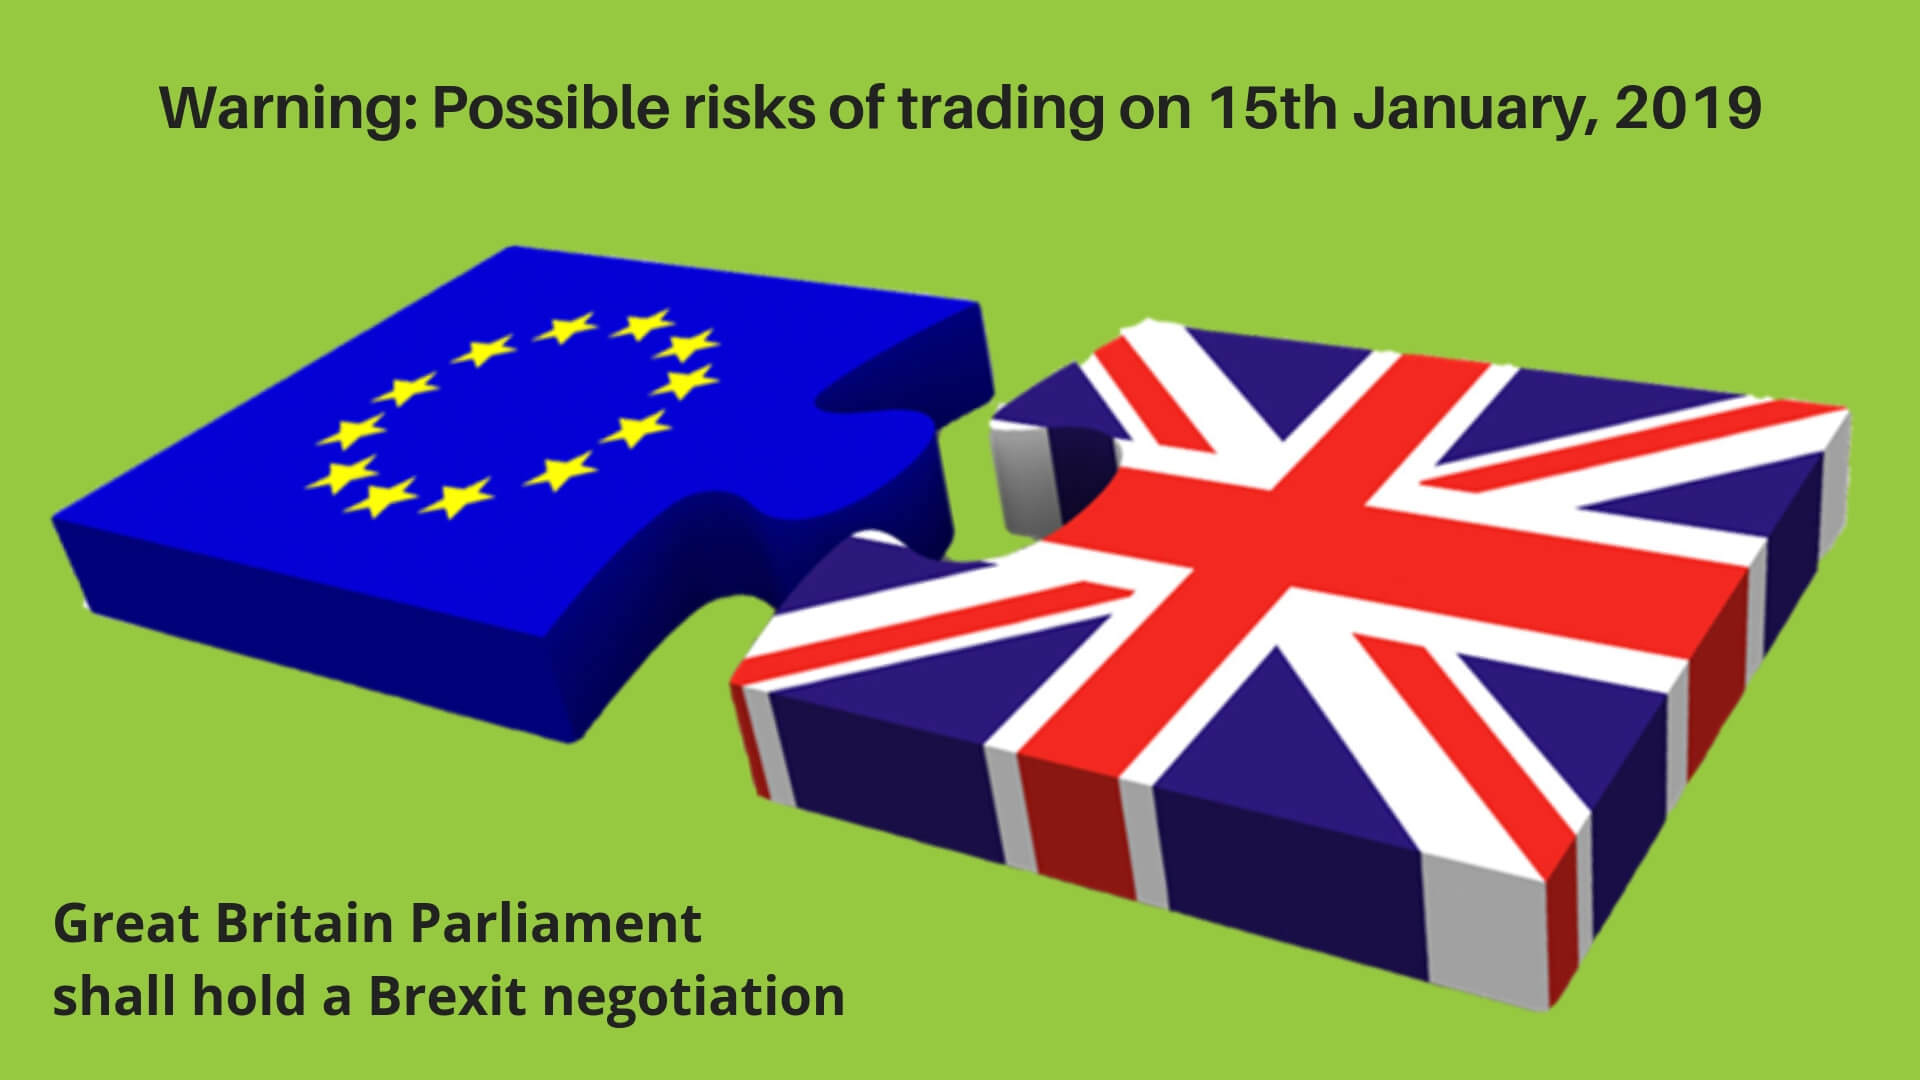 Possible Risk Of Trading For Brexit Negotiation